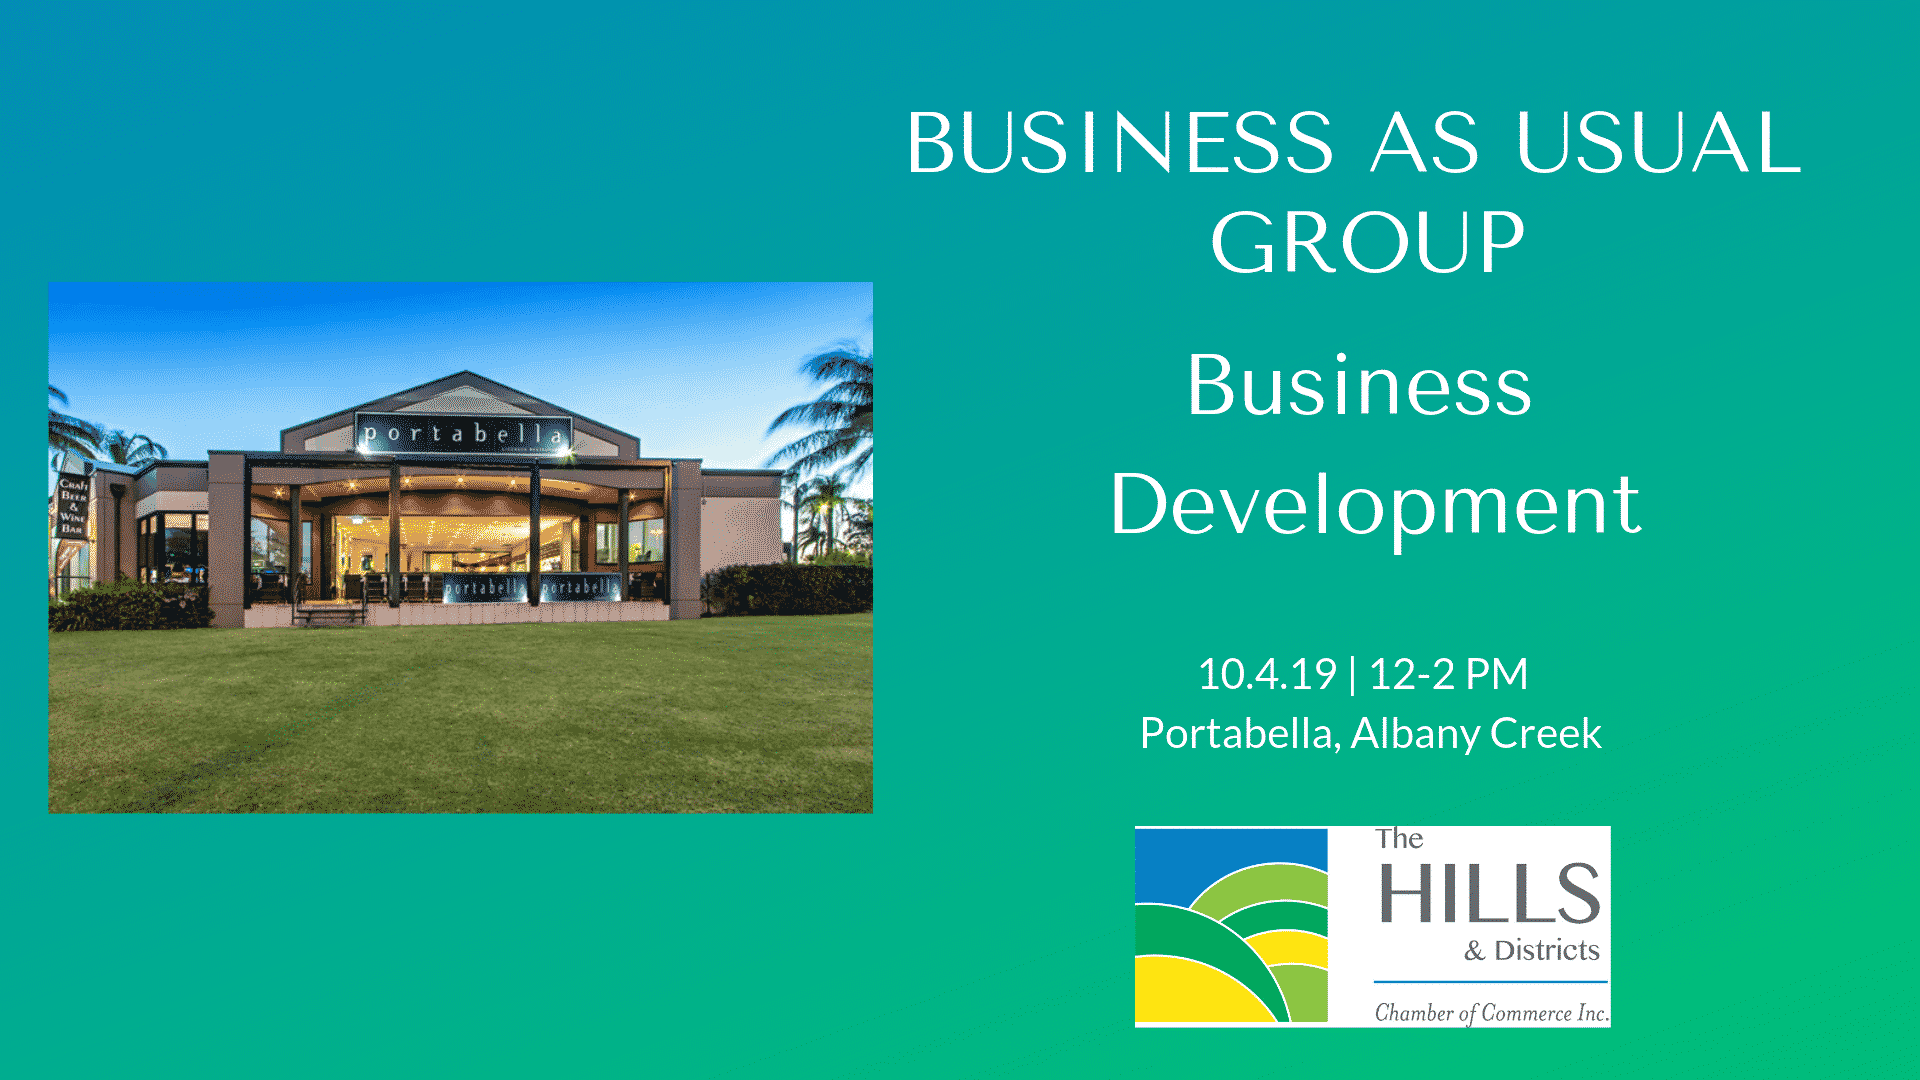 Business Development » Business as Usual Group